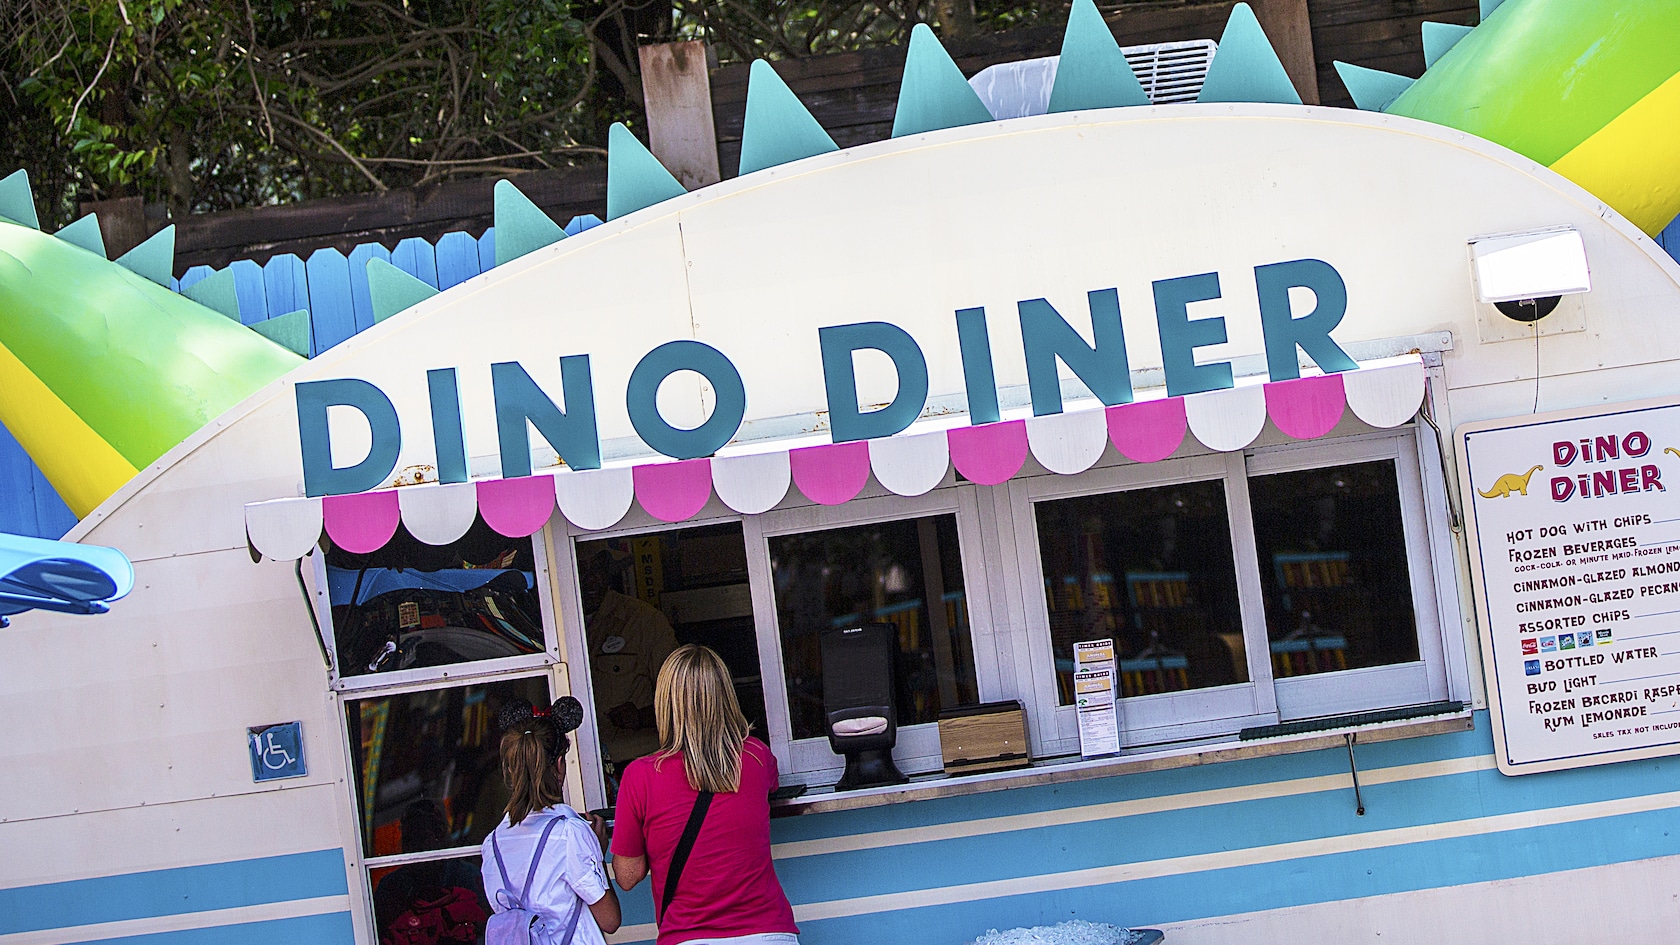 Guests line up to place an order outside the Dino-Diner trailer, with its dinosaur-themed décor